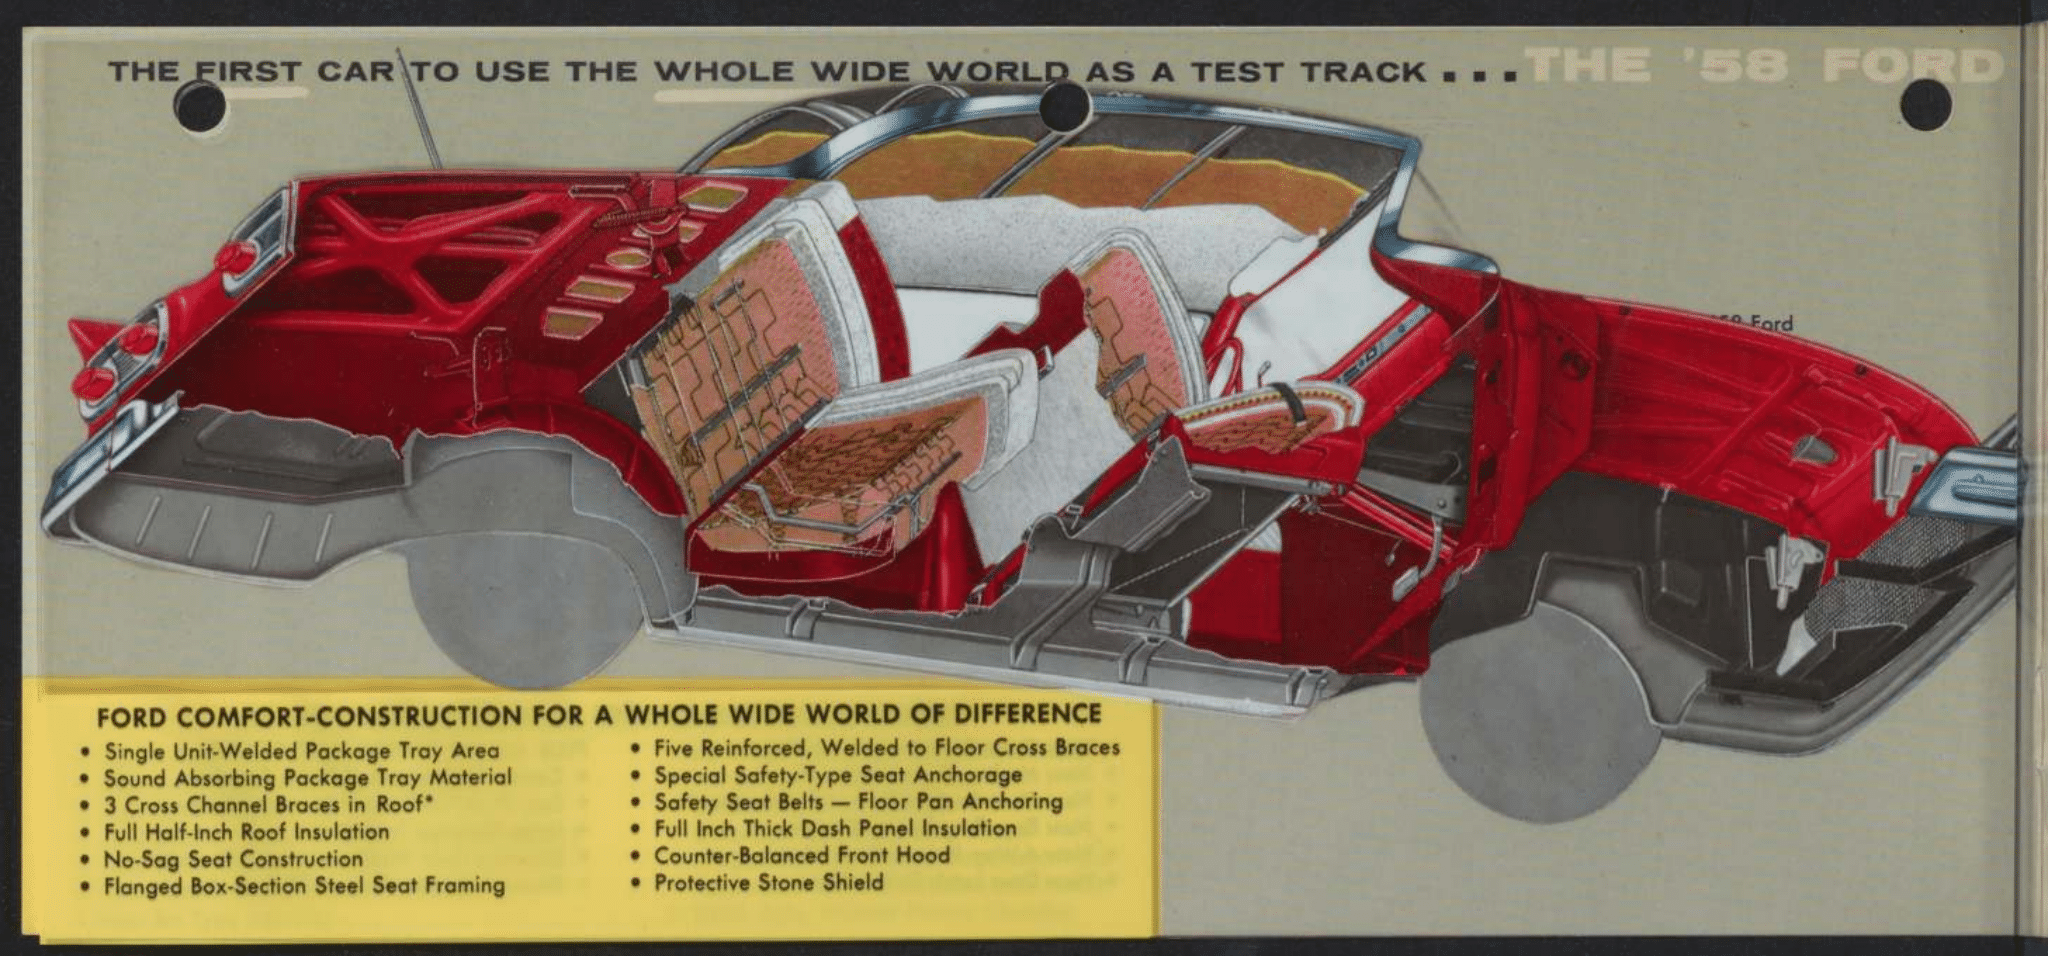 Fords for 1958 (6).png-2023-5-14 13.0.26